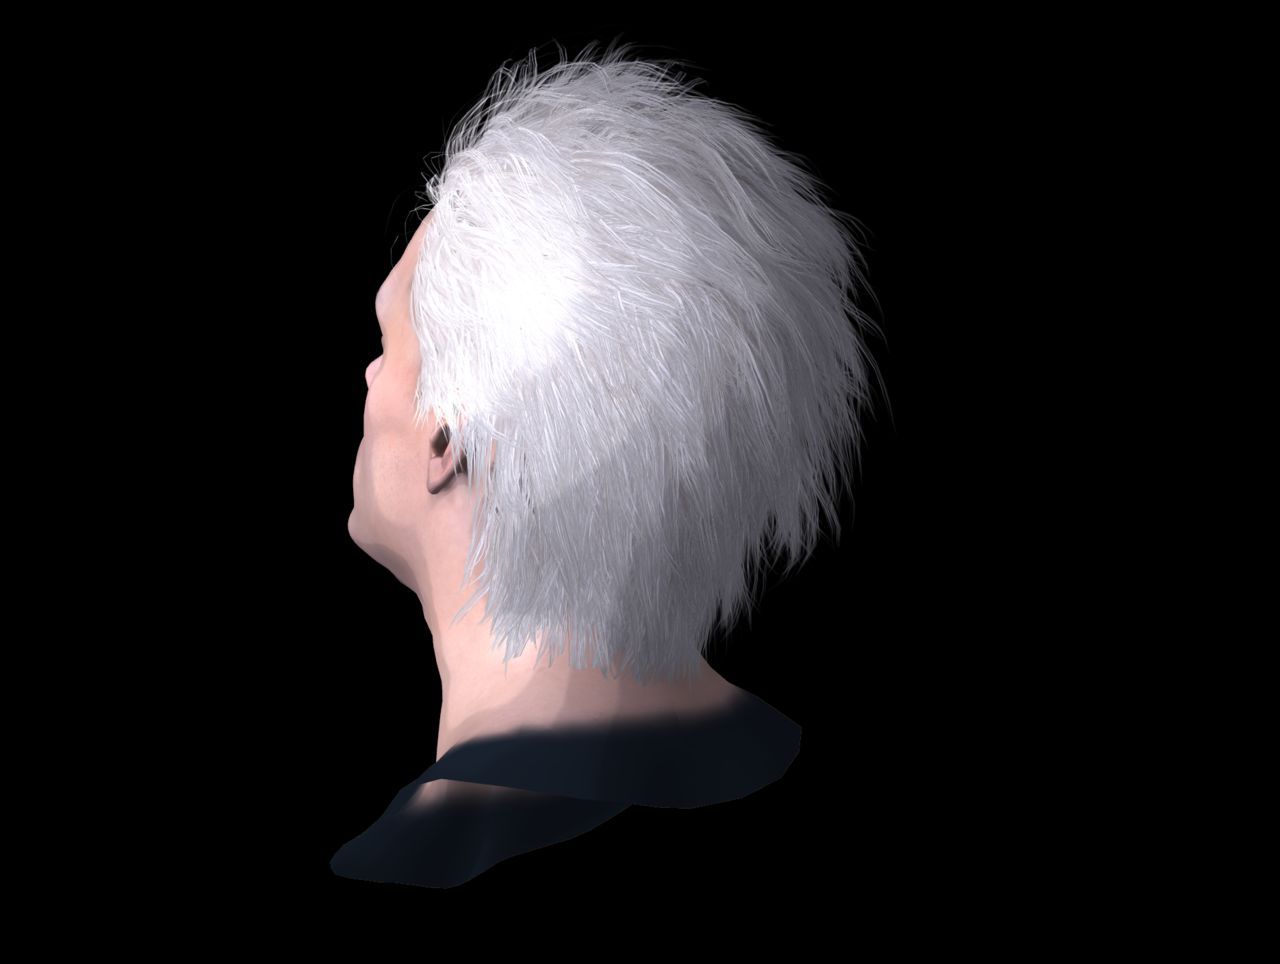 [J.A.] DMC5 | Vergil Head Reference PNG 33